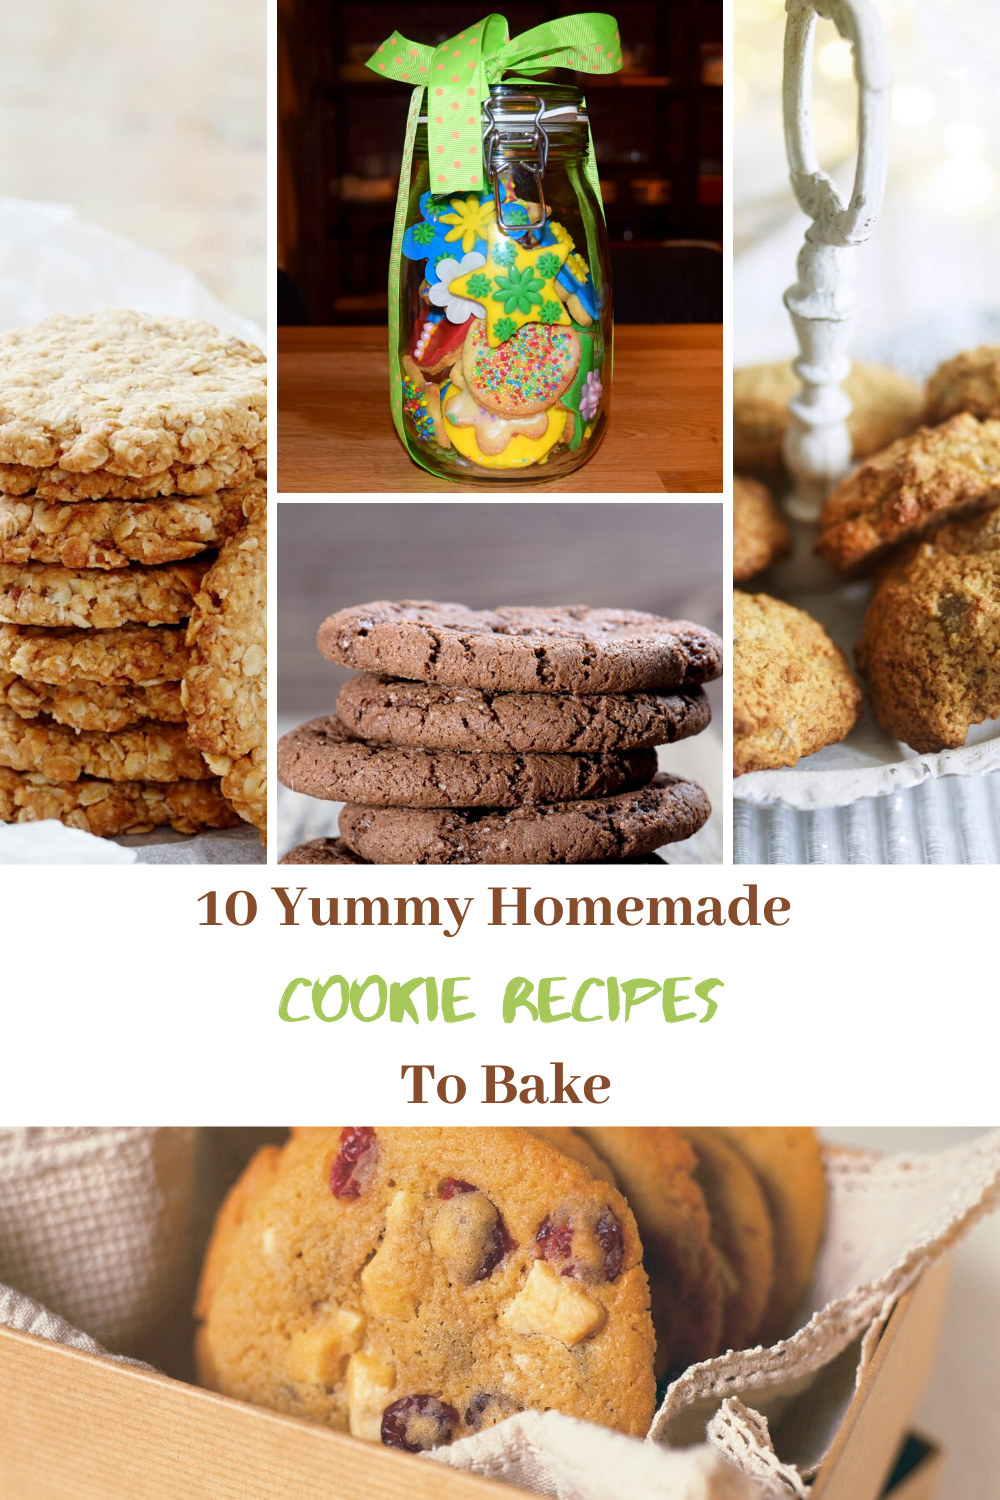 10 Yummy Homemade Cookie Recipes